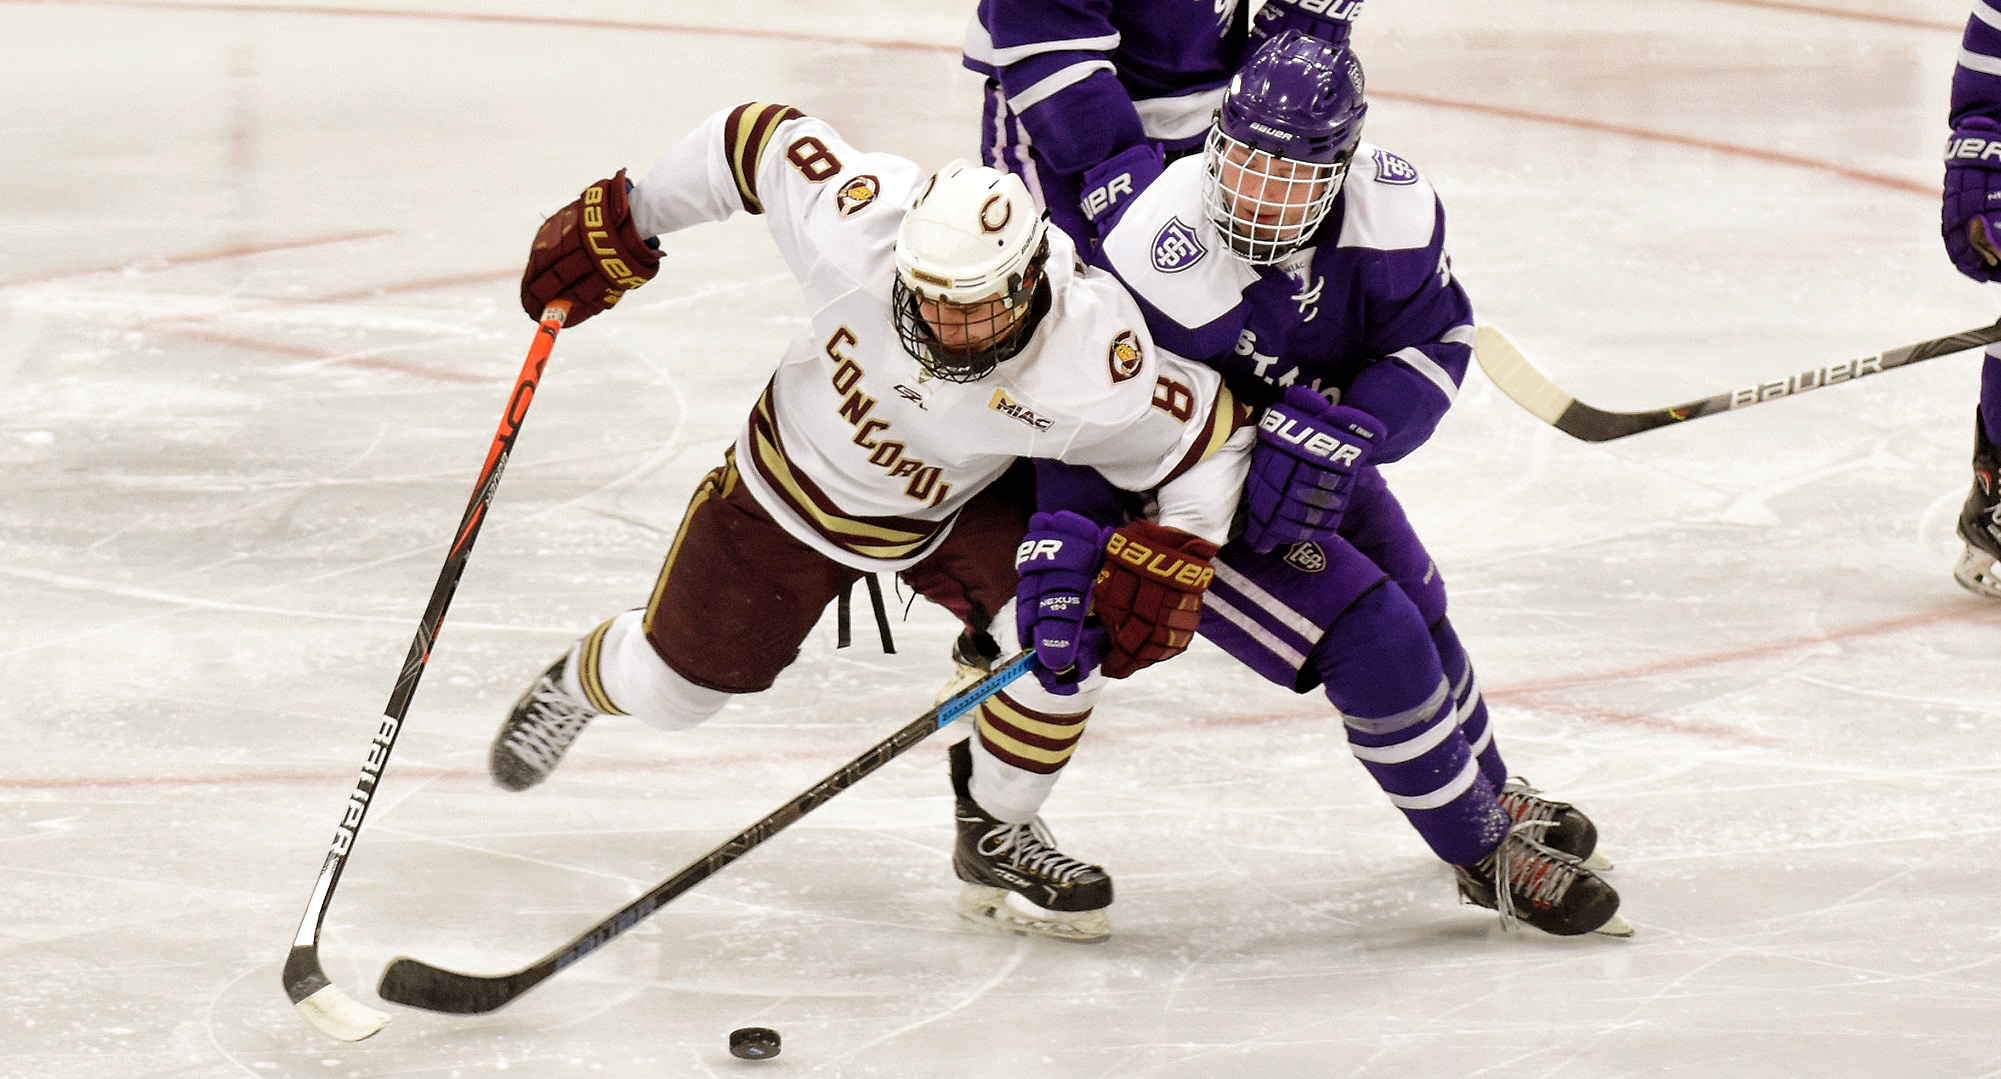 Aaron Herdt gets tied up with a St. Thomas defensive player in the second period of the Cobbers' series finale with UST. Herdt had one of Concordia's two goals on the day.